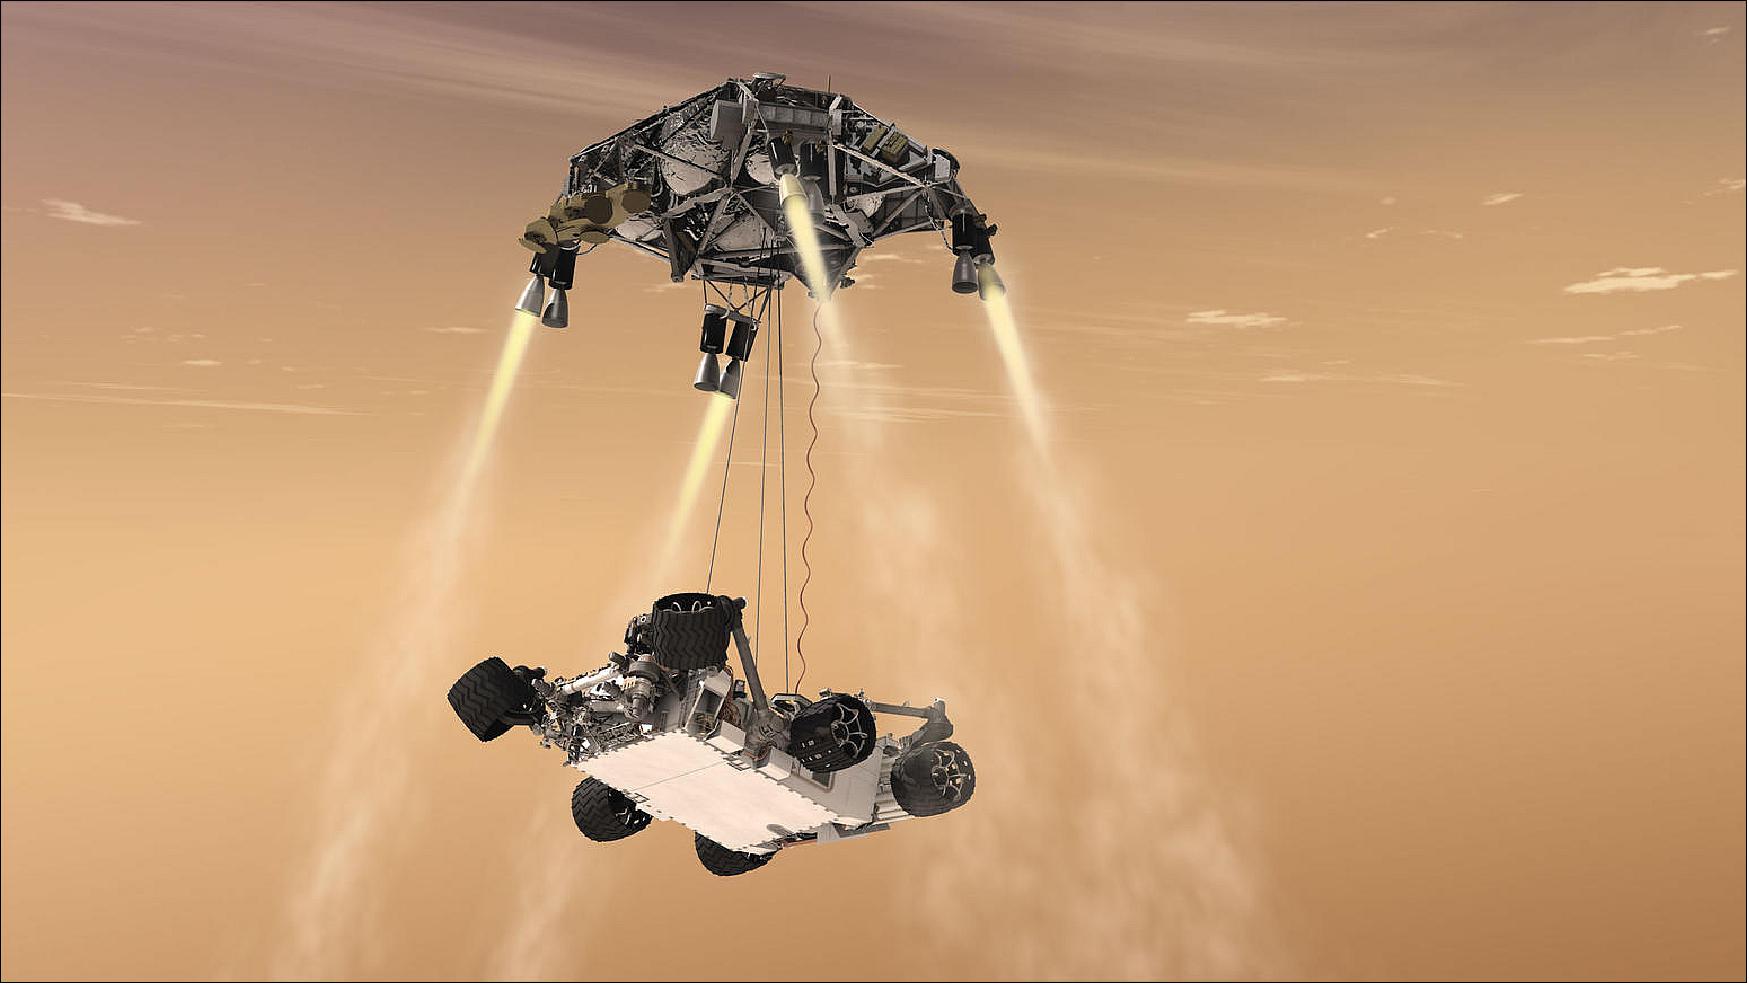 Figure 4: Leveraging heritage technology: Mars Rover Curiosity's sky-crane maneuver. This artist's concept shows the sky-crane maneuver during the descent of NASA's Curiosity rover to the Martian surface. The Mars mission launching in 2020 would leverage the design of this landing system and other aspects of the Mars Science Laboratory architecture (image credit: NASA/JPL-Caltech)